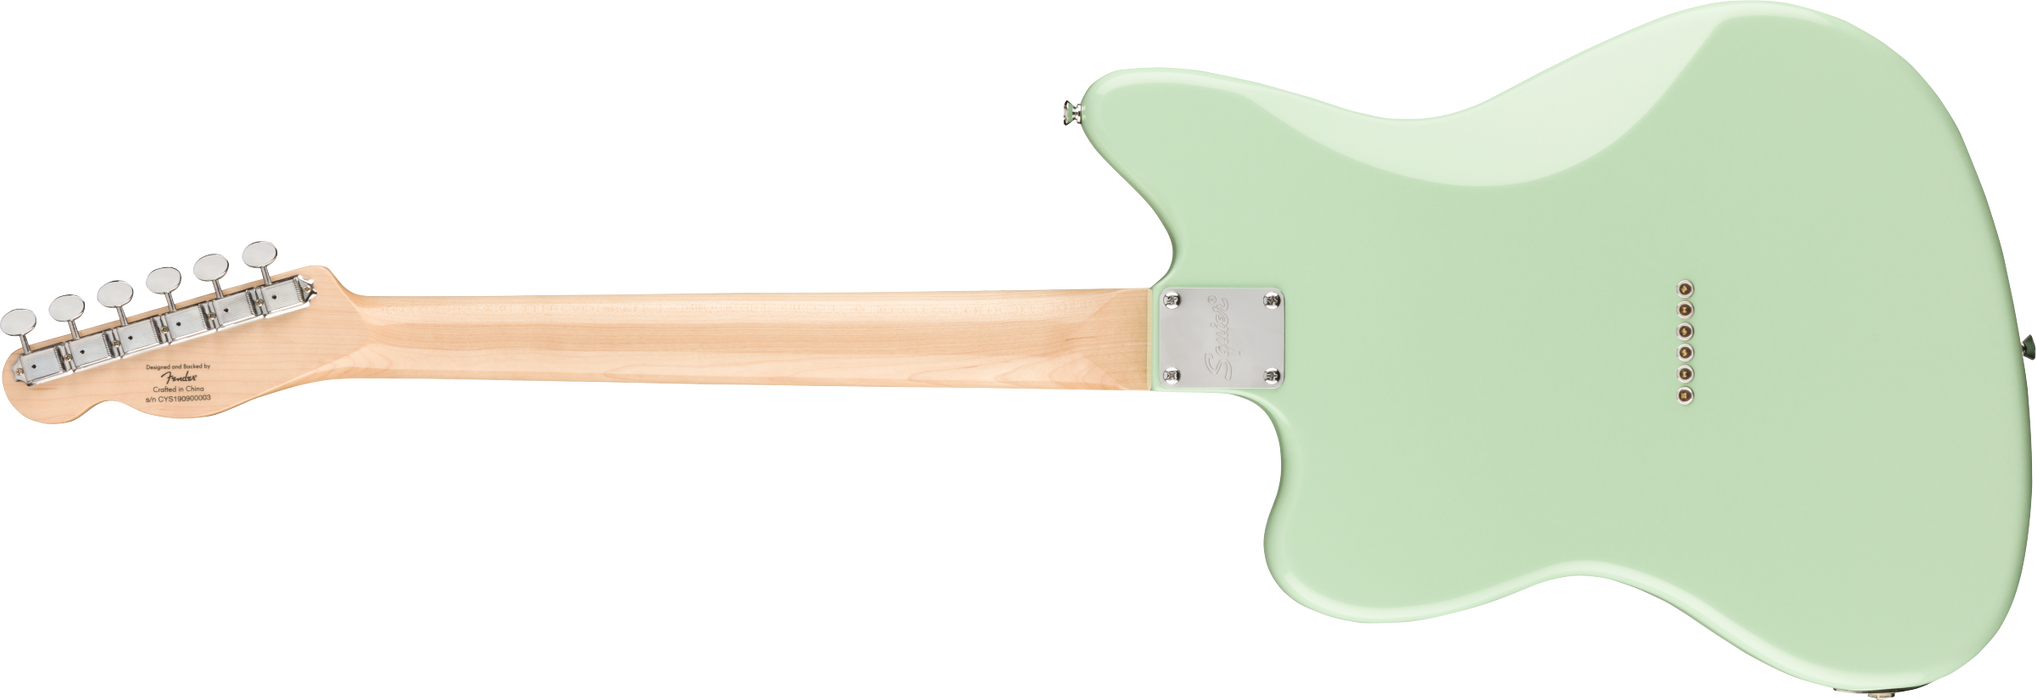 DISC - Squier Paranormal Offset Telecaster Maple Fingerboard Surf Green Electric Guitar